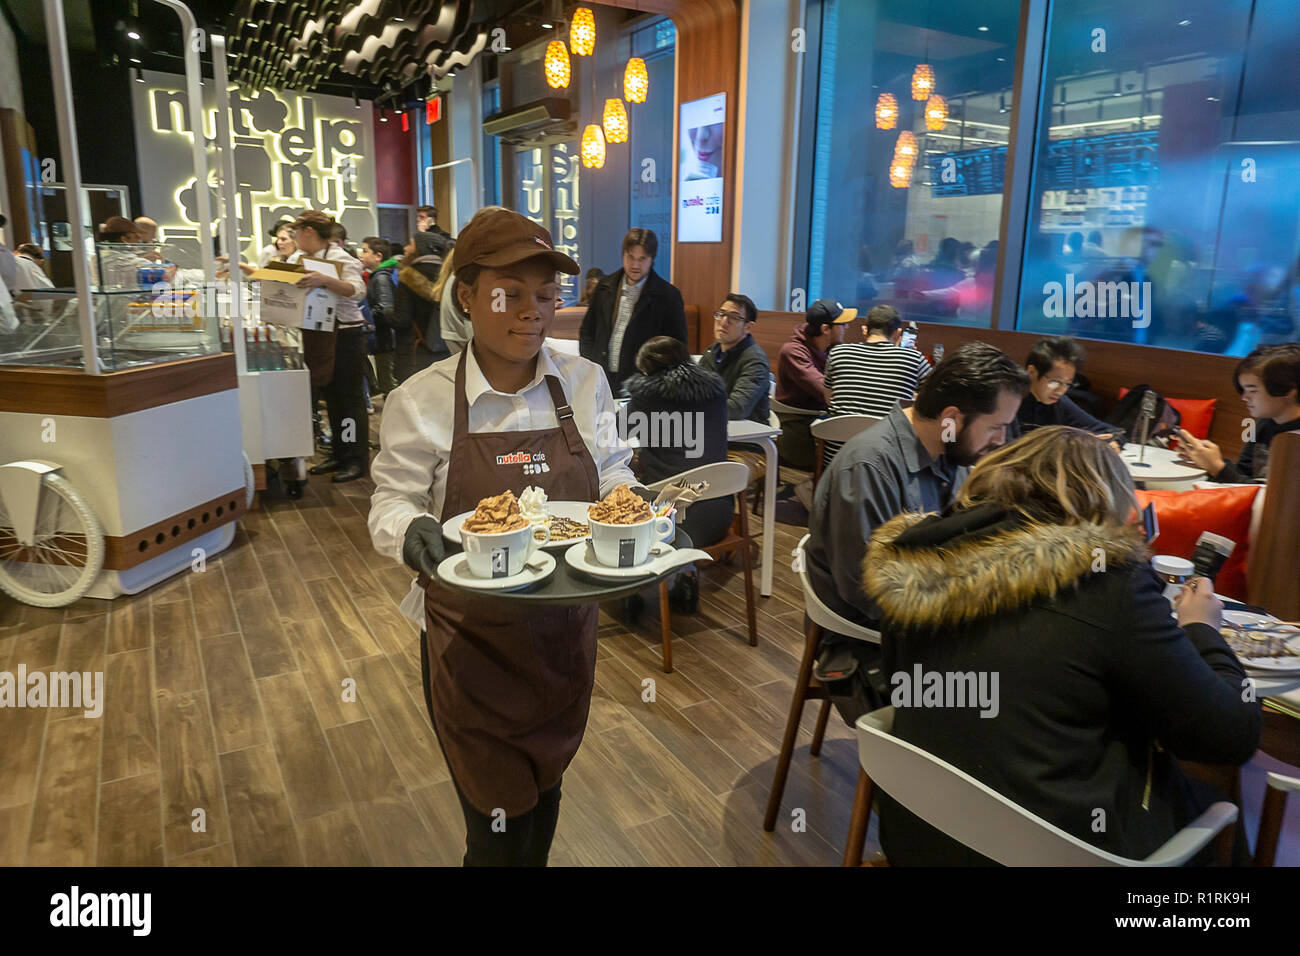 New York, USA. 14th Nov 2018. Nutella lovers flock to the grand opening of  the Nutella Cafe in the Greenwich Village neighborhood of New York on  Wednesday November 14, 2018. This is